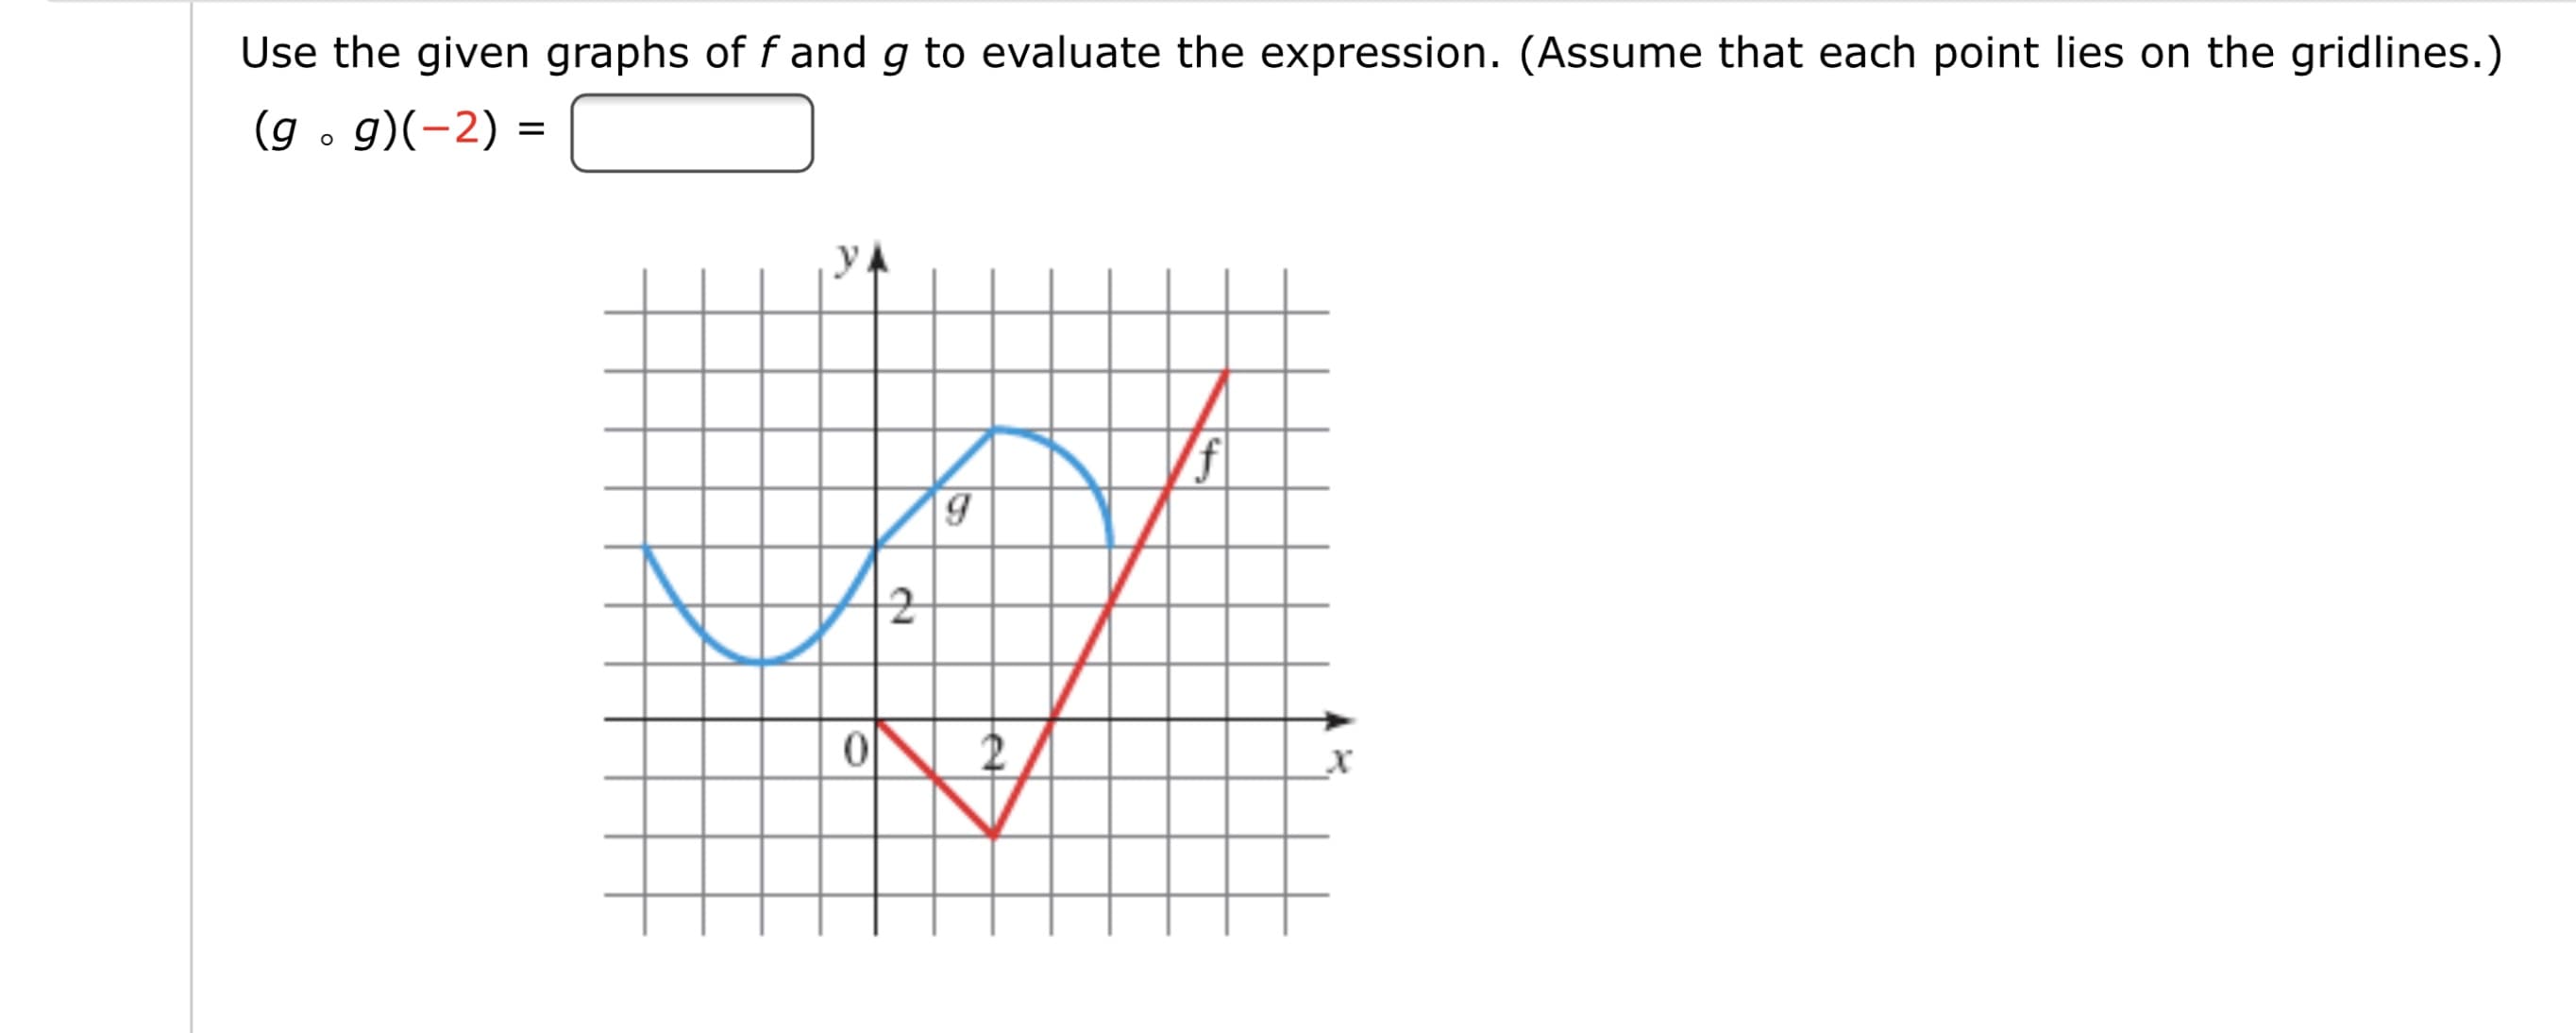 Use the given graphs of f and g to evaluate the expression. (Assume that each point lies on the gridlines.)
(g . g)(-2) =
y.
